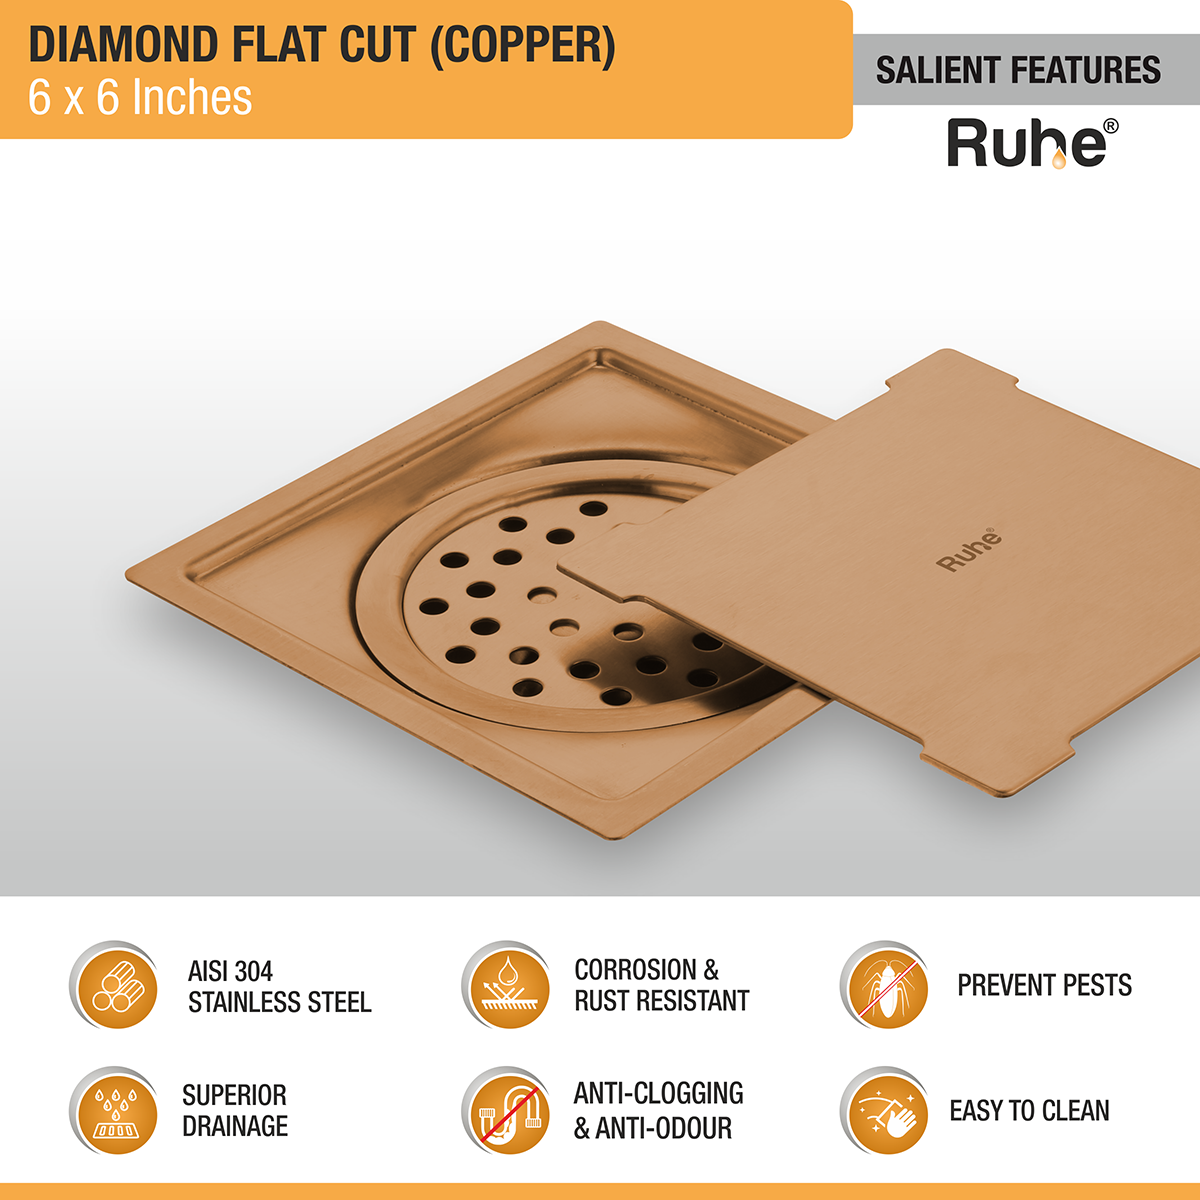 Diamond Square Flat Cut Floor Drain in Antique Copper PVD Coating (6 x 6 Inches) features